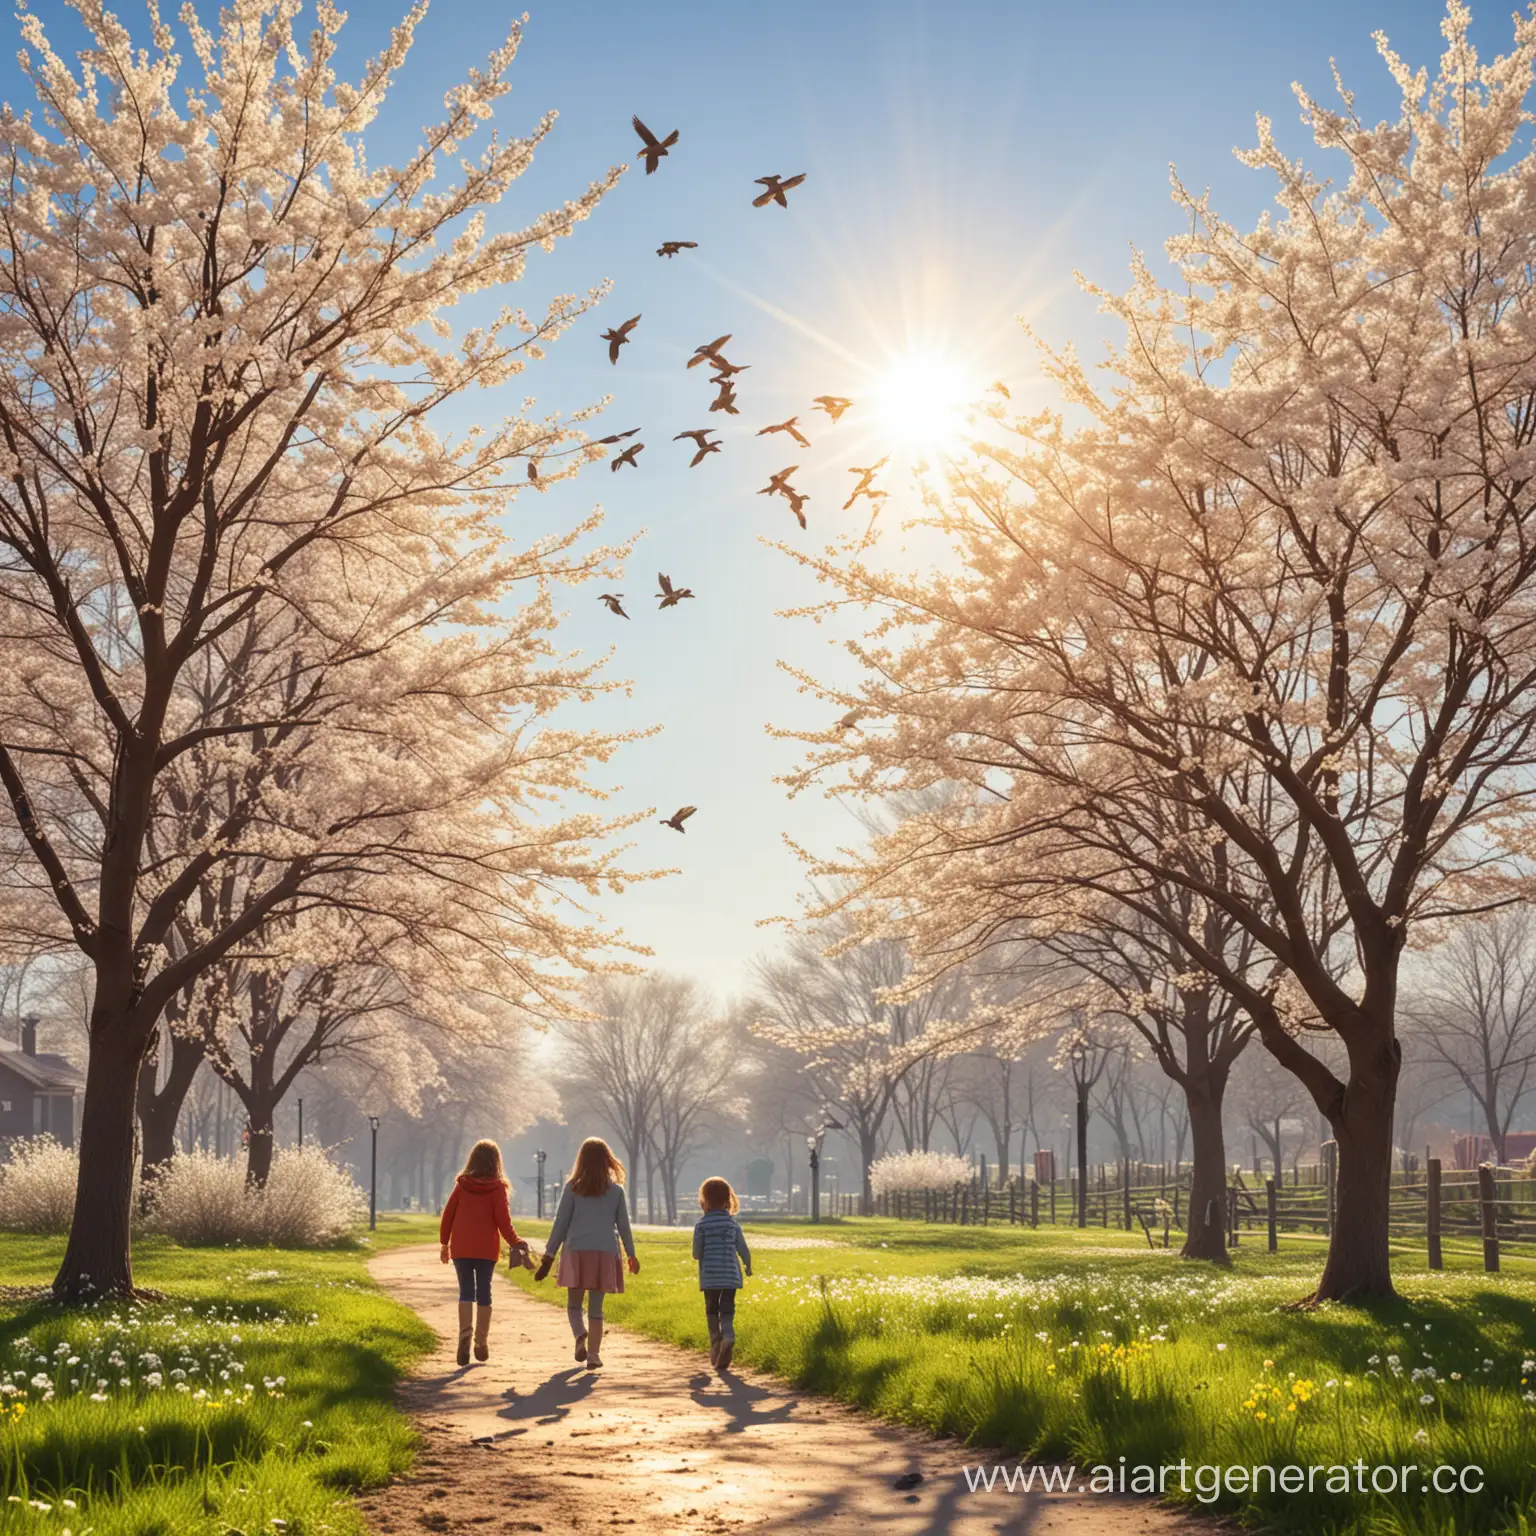 Joyful-Children-Playing-Outside-on-a-Sunny-Spring-Day-with-Birds